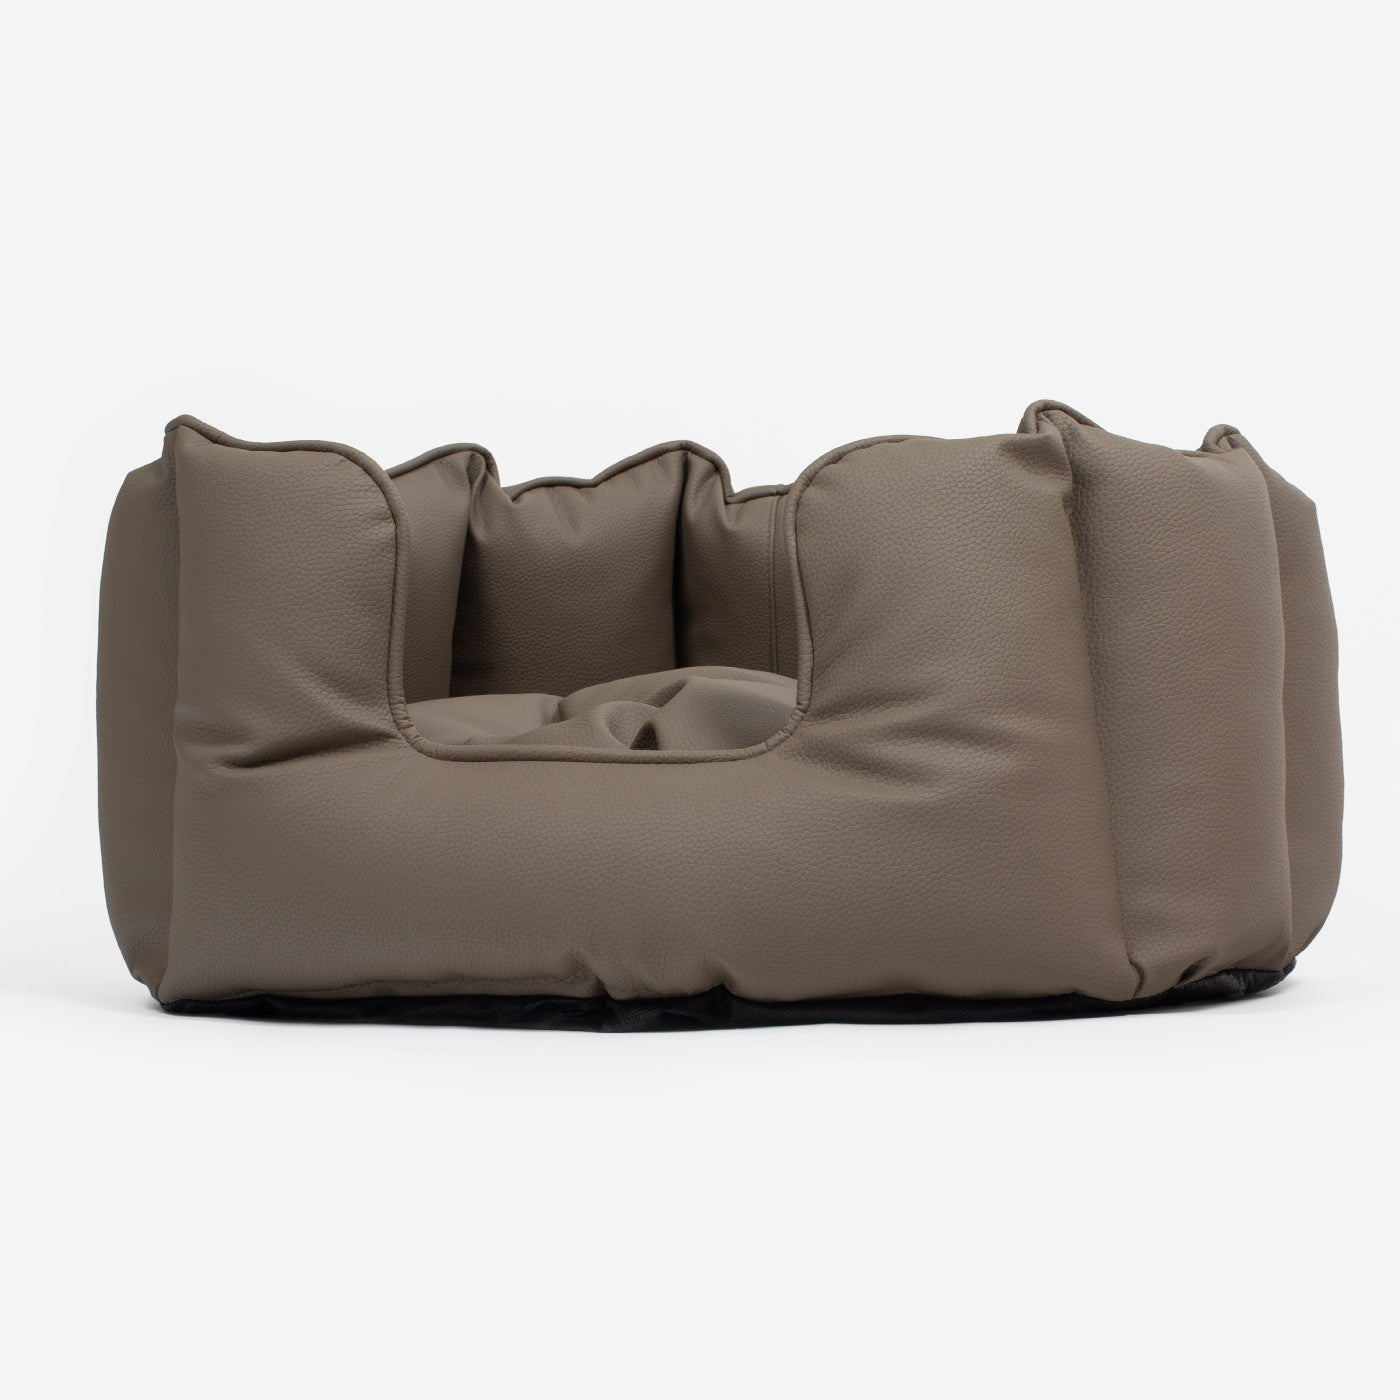 [color:camel] Luxury Handmade High Wall in Rhino Tough Desert Faux Leather, in Camel, Perfect For Your Pets Nap Time! Available To Personalize at Lords & Labradors US